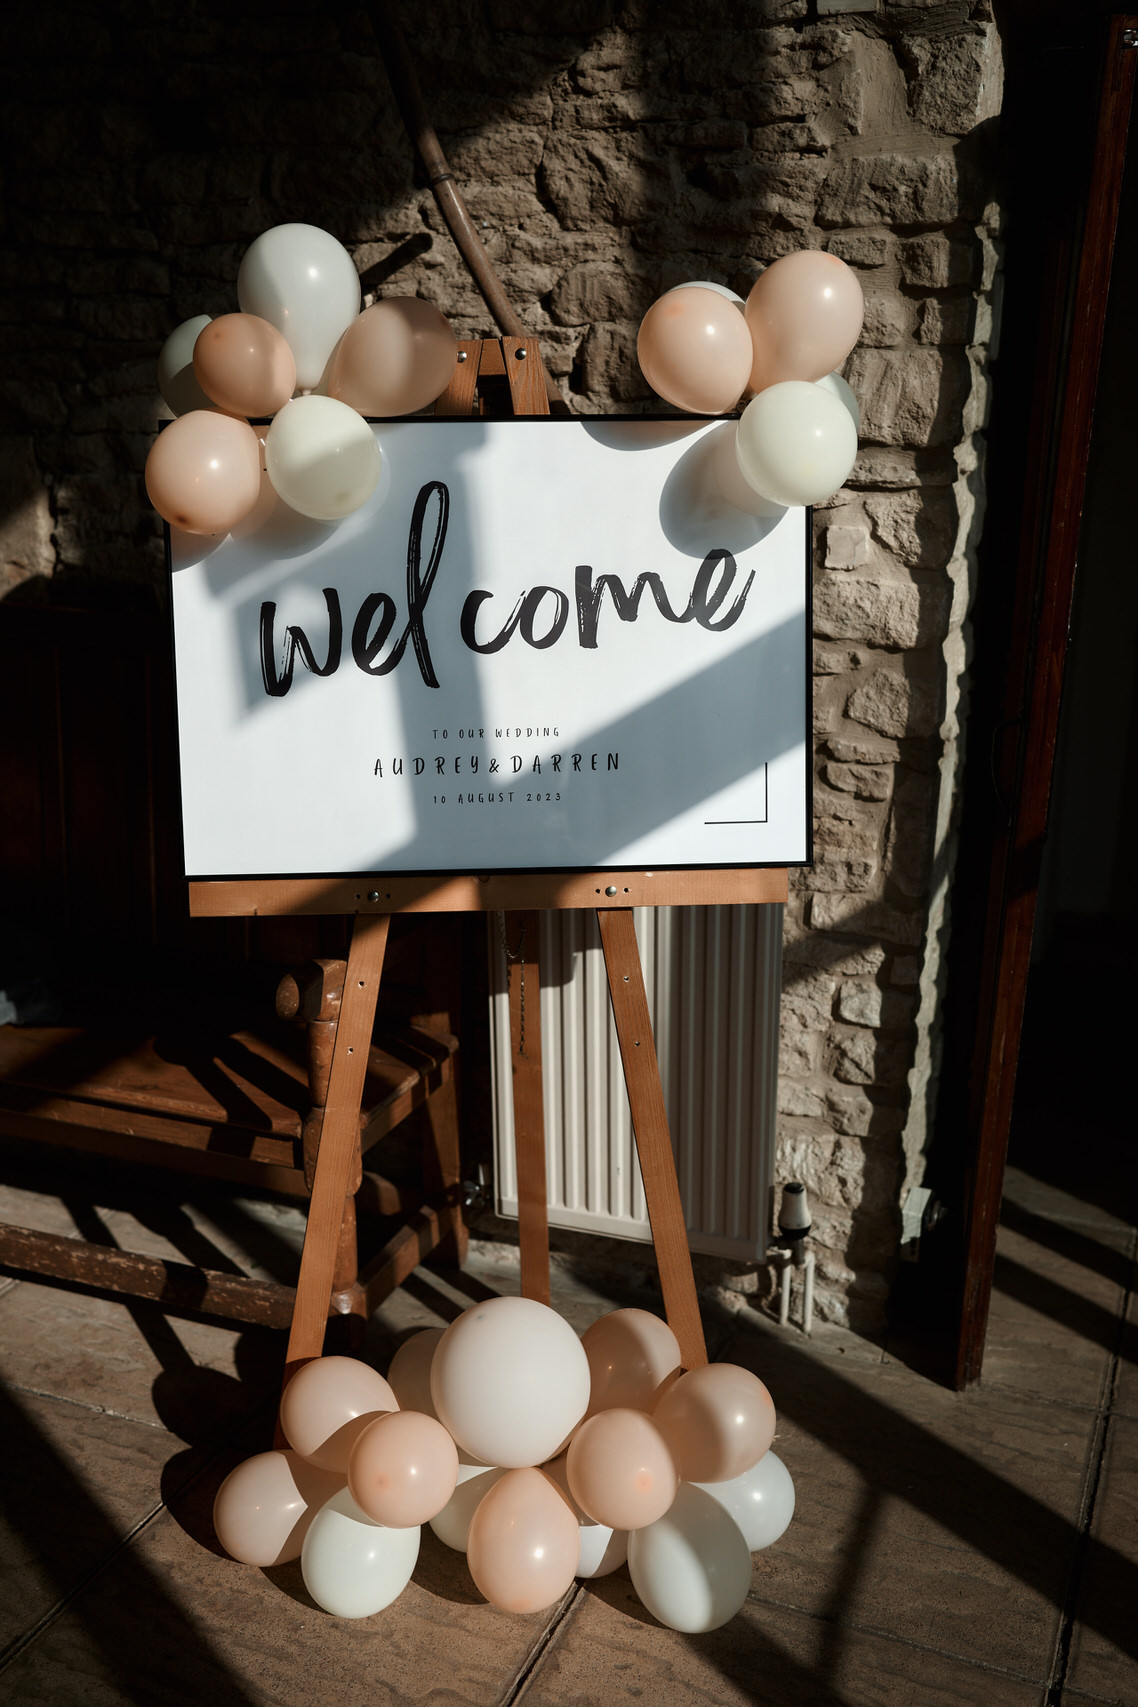 A welcome sign surrounded by balloons is set up on a stand.